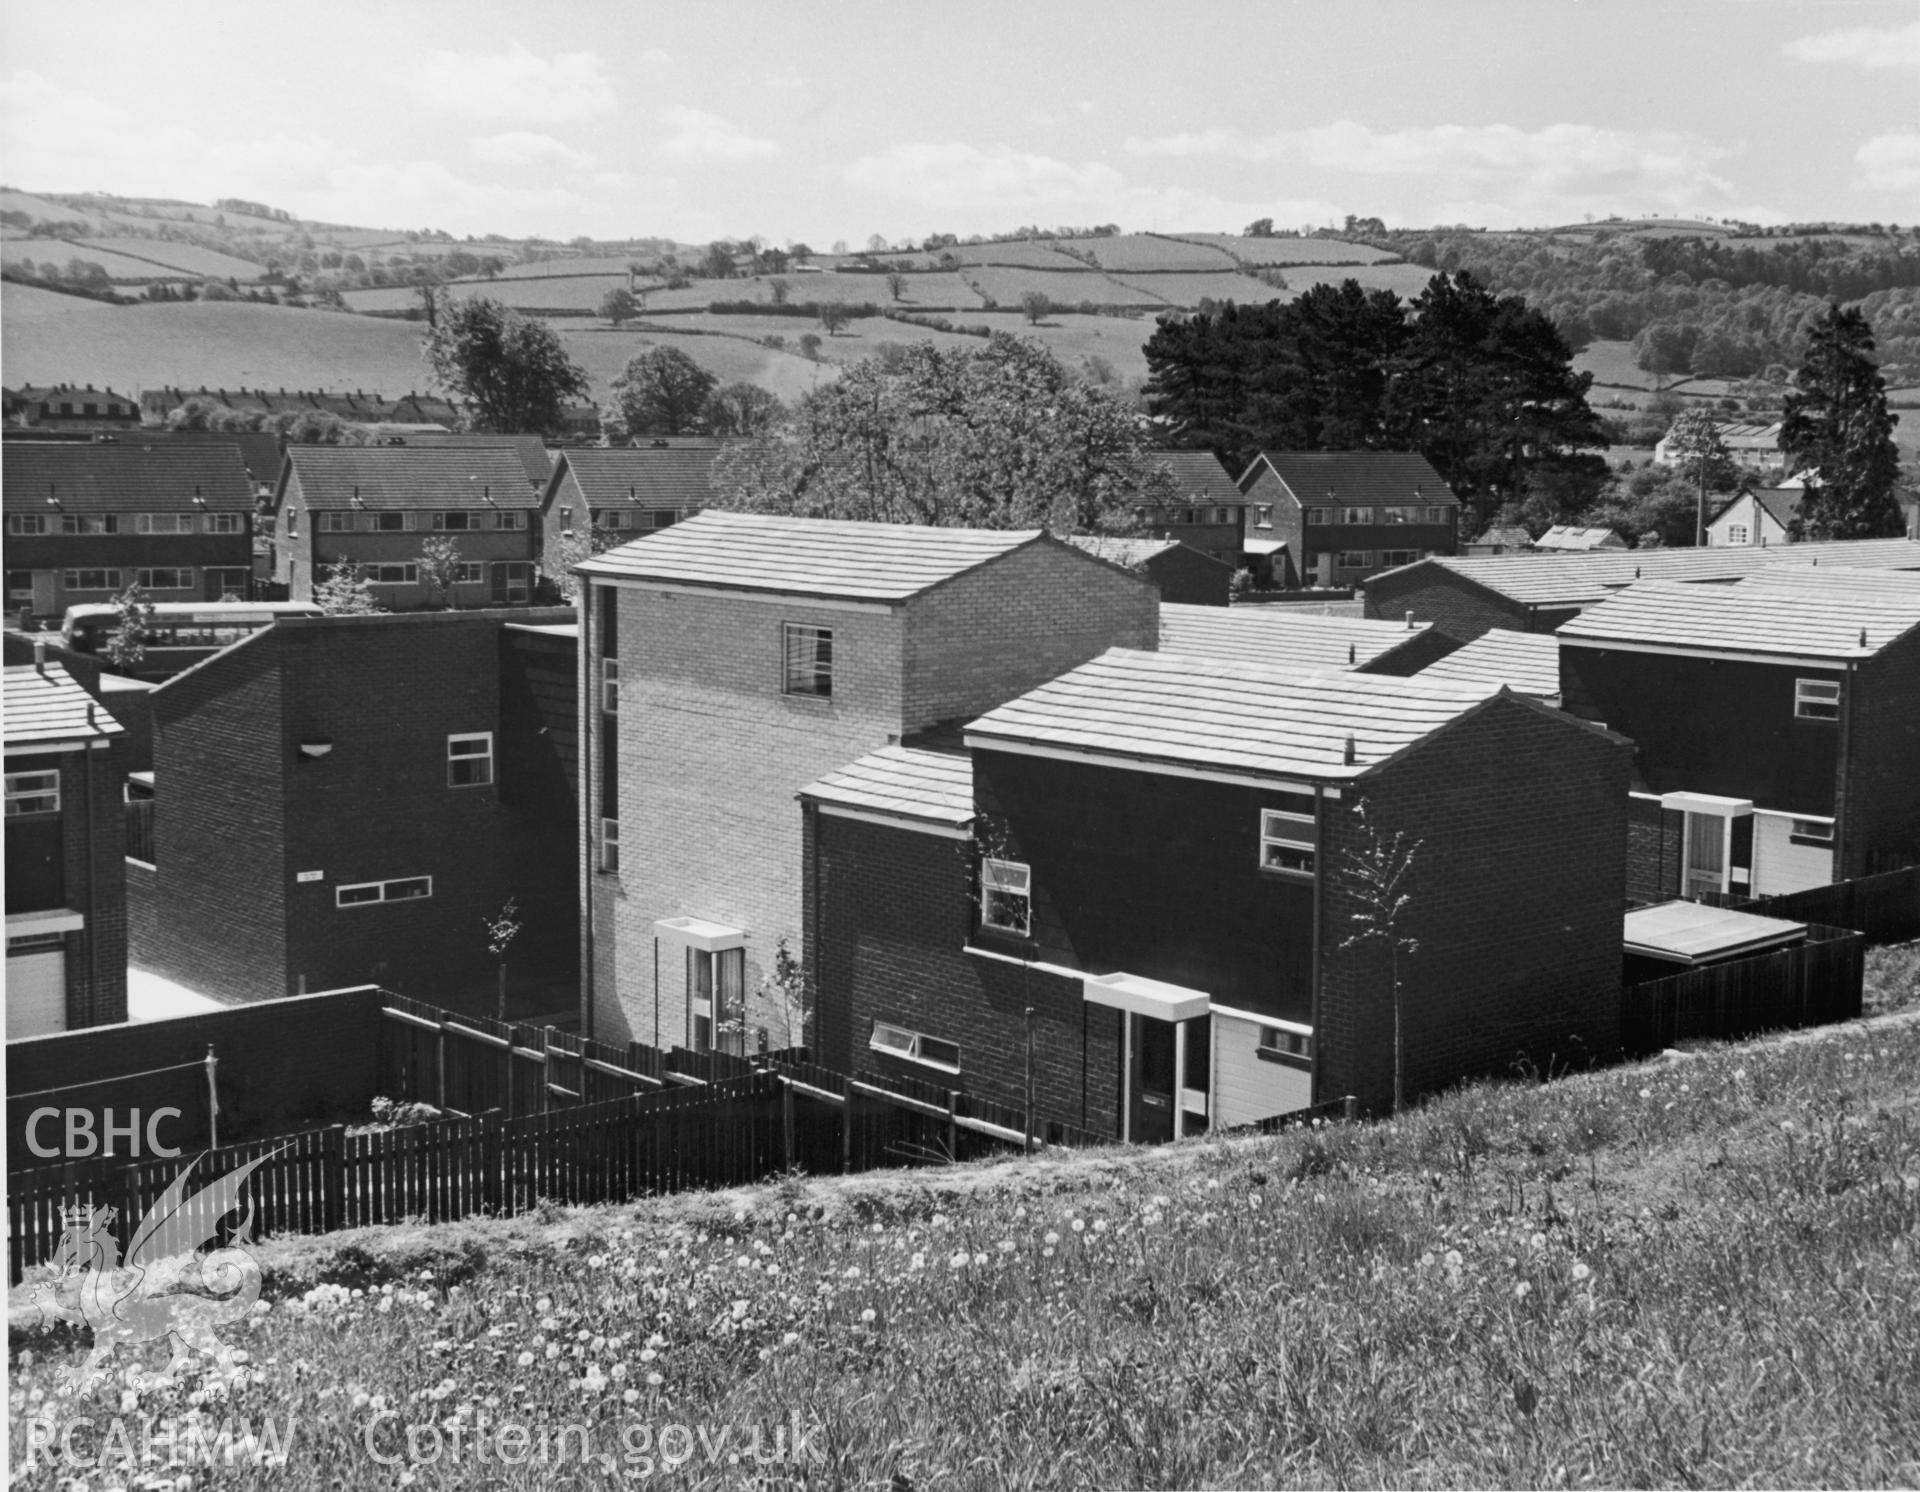 1 b/w print showing modern housing estate in Newtown, Powys; collated by the former Central Office of Information.